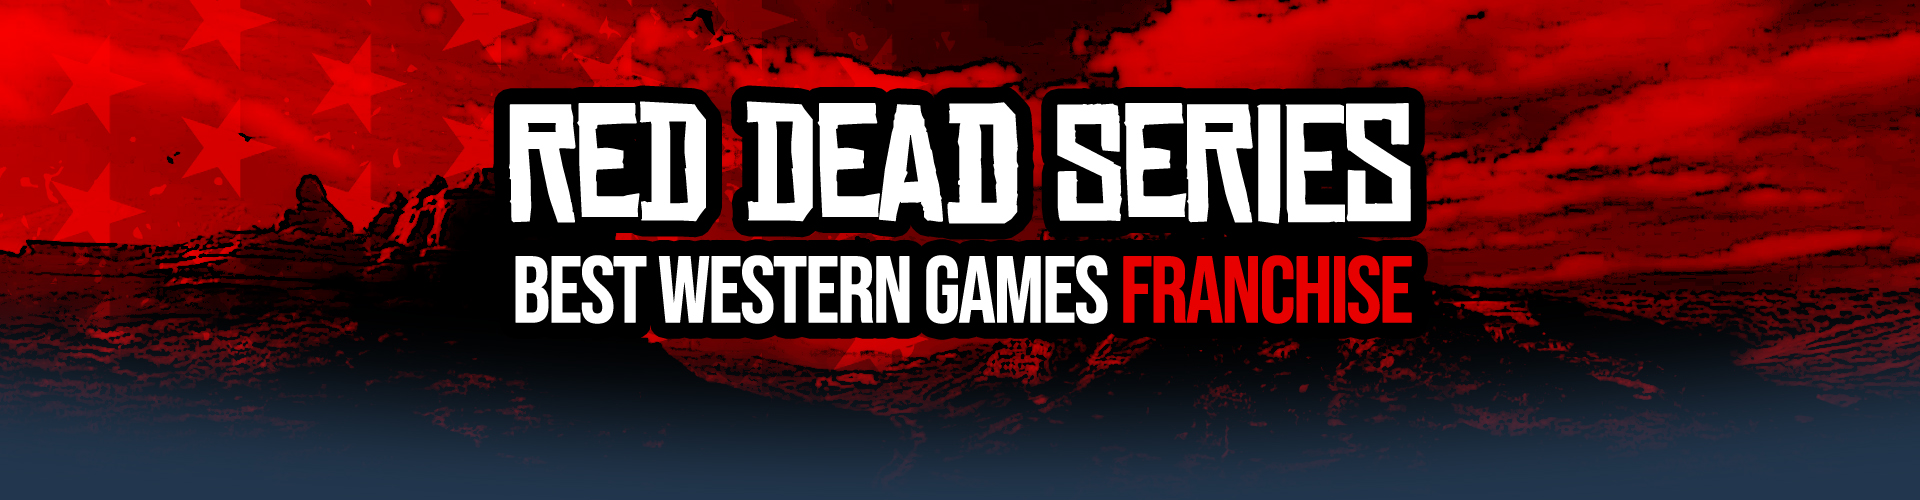 Red Dead Serie: The Best Western Games Franchise